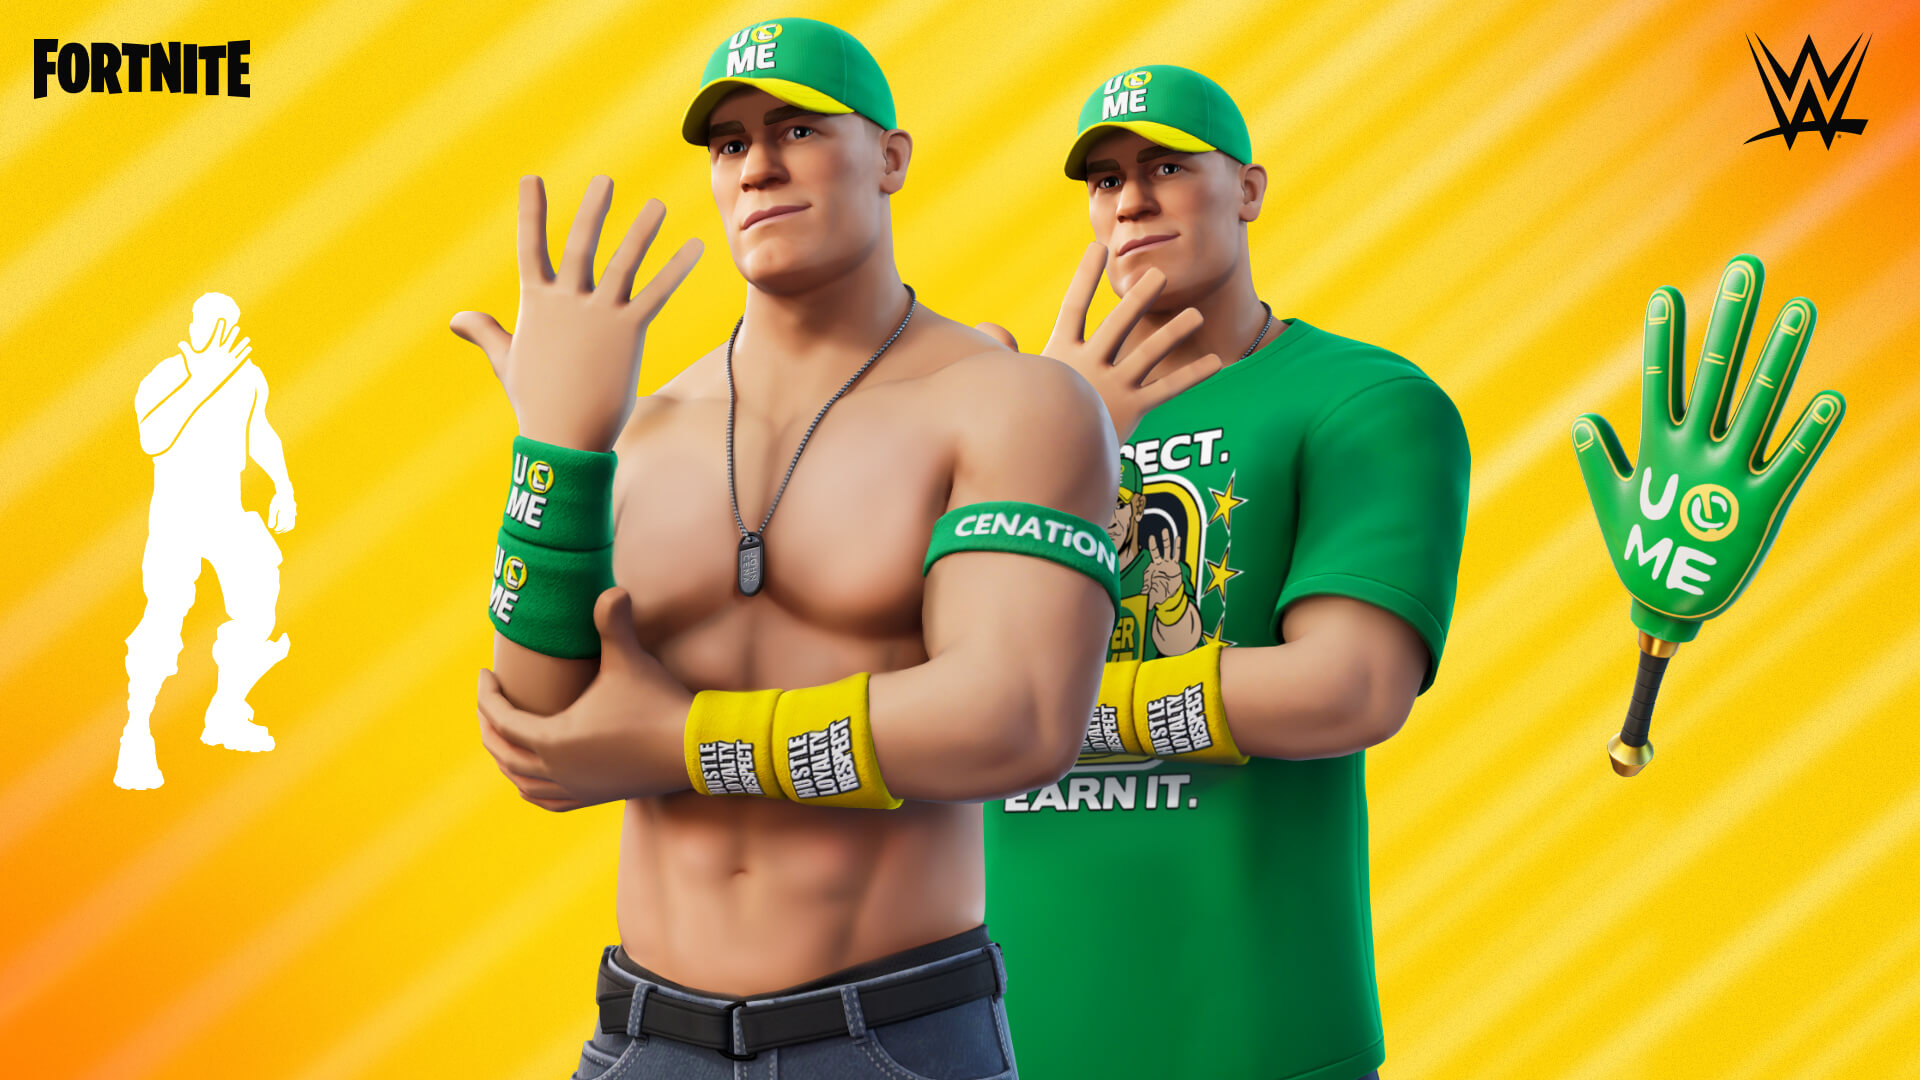 John Cena is coming to the Fortnite Item Shop